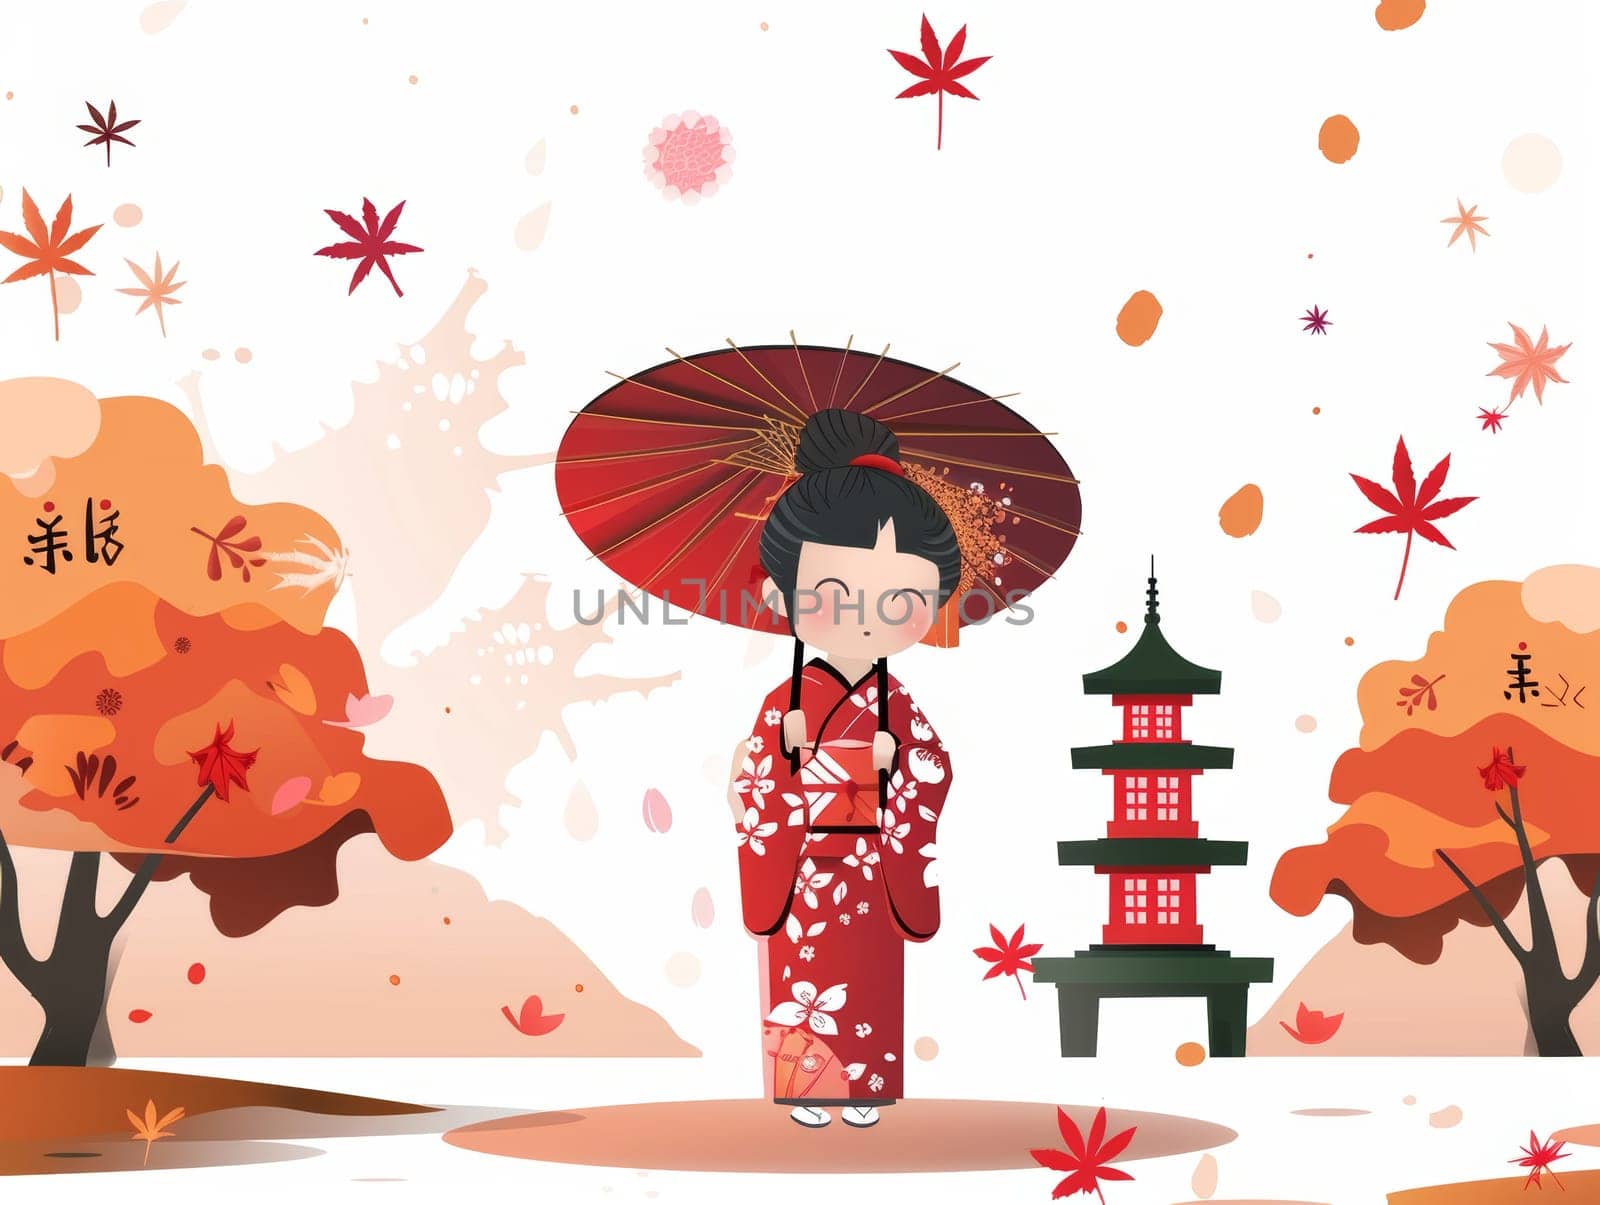 A serene geisha in a vibrant red kimono with delicate floral patterns stands amid a stunning autumnal landscape, holding a traditional paper paras